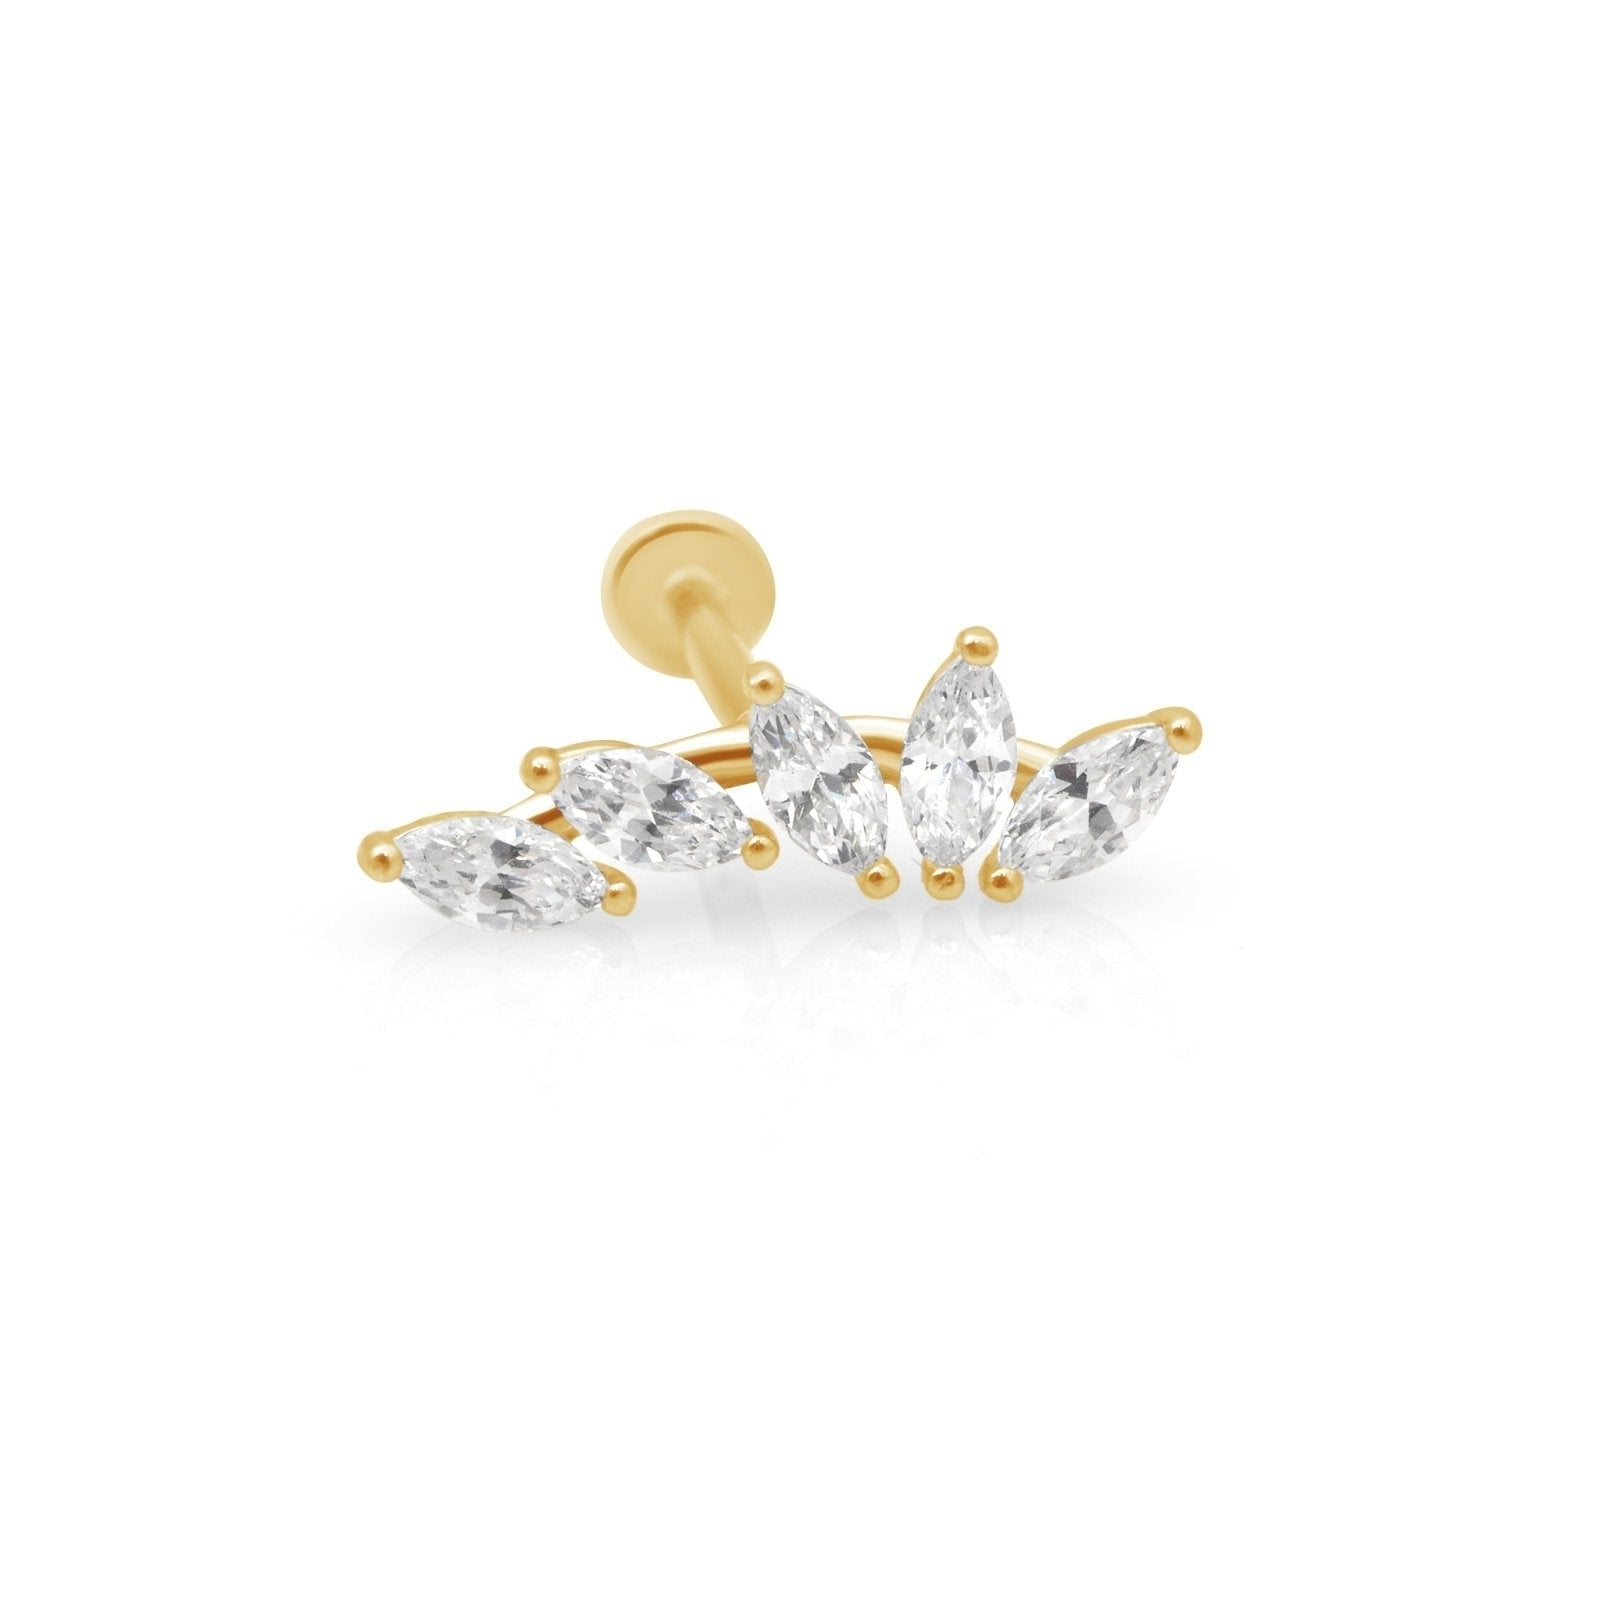 Marquise Illusion Ear Climber Flat Back Earring Earrings Estella Collection #product_description# 18224 14k Birthstone Birthstone Earrings #tag4# #tag5# #tag6# #tag7# #tag8# #tag9# #tag10# 5MM